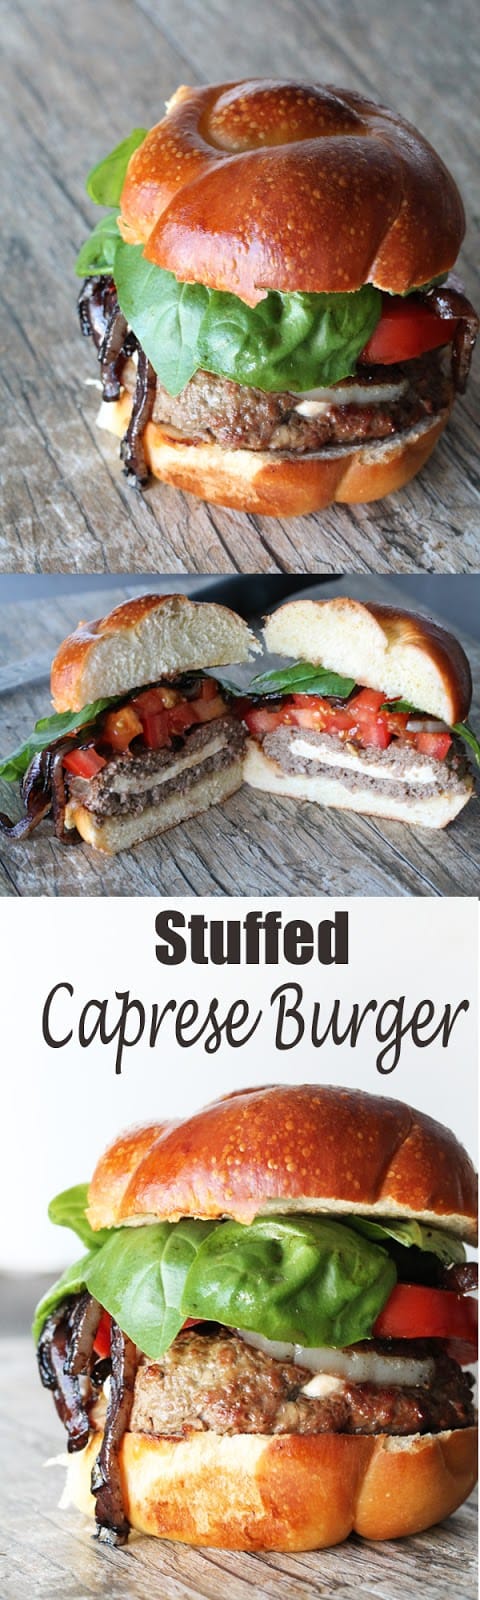 Caprese is one of those classic dishes that is just delicious every time Stuffed Caprese Burgers